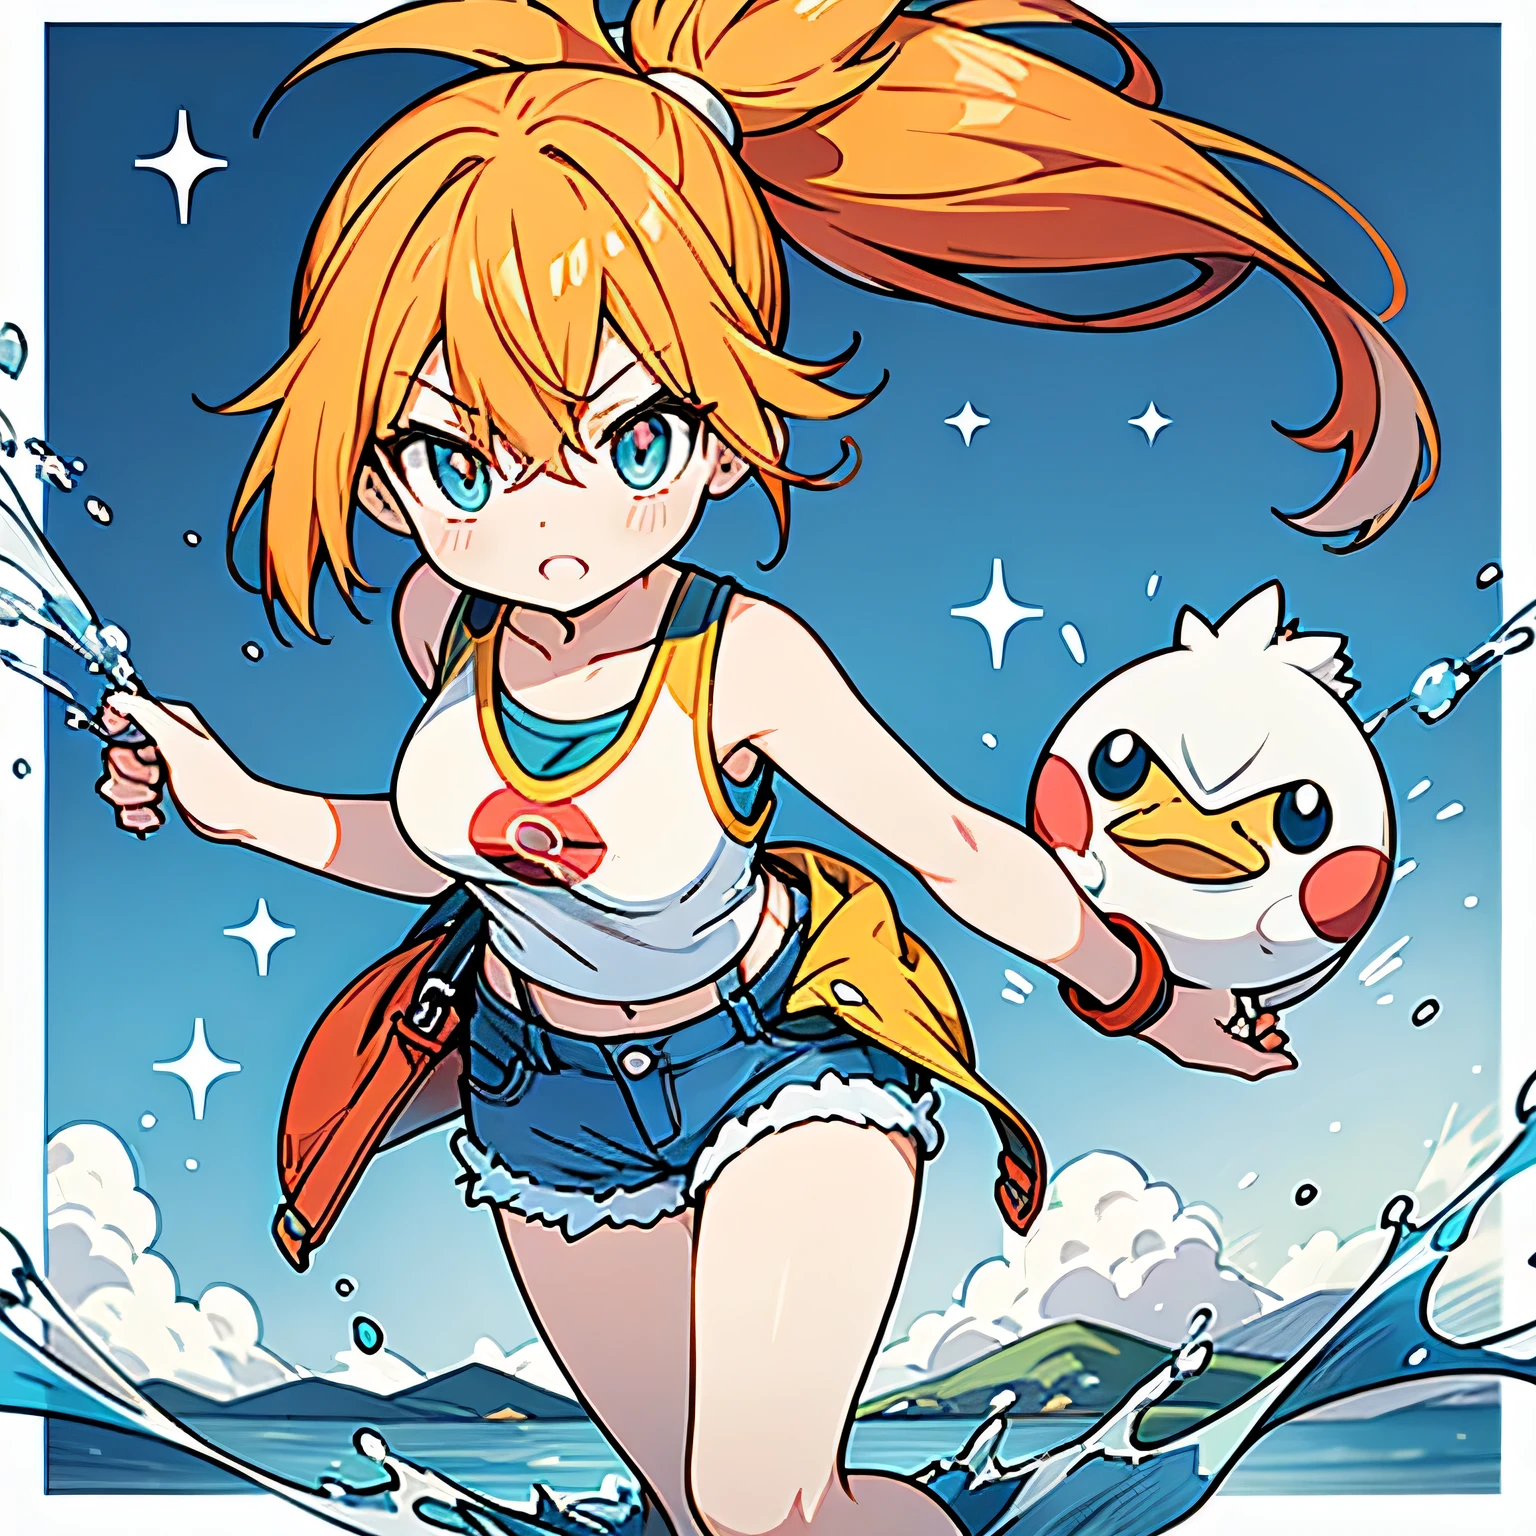 - Misty's vibrant orange hair in a side ponytail
- Wearing a yellow tank top and denim shorts
- Carrying a red and white pokeball in hand
- Posing with her loyal water-type Pokemon, such as Psyduck or Starmie
- Background of a serene water scene, like a lake or river
- Hint of determination and confidence in her expression